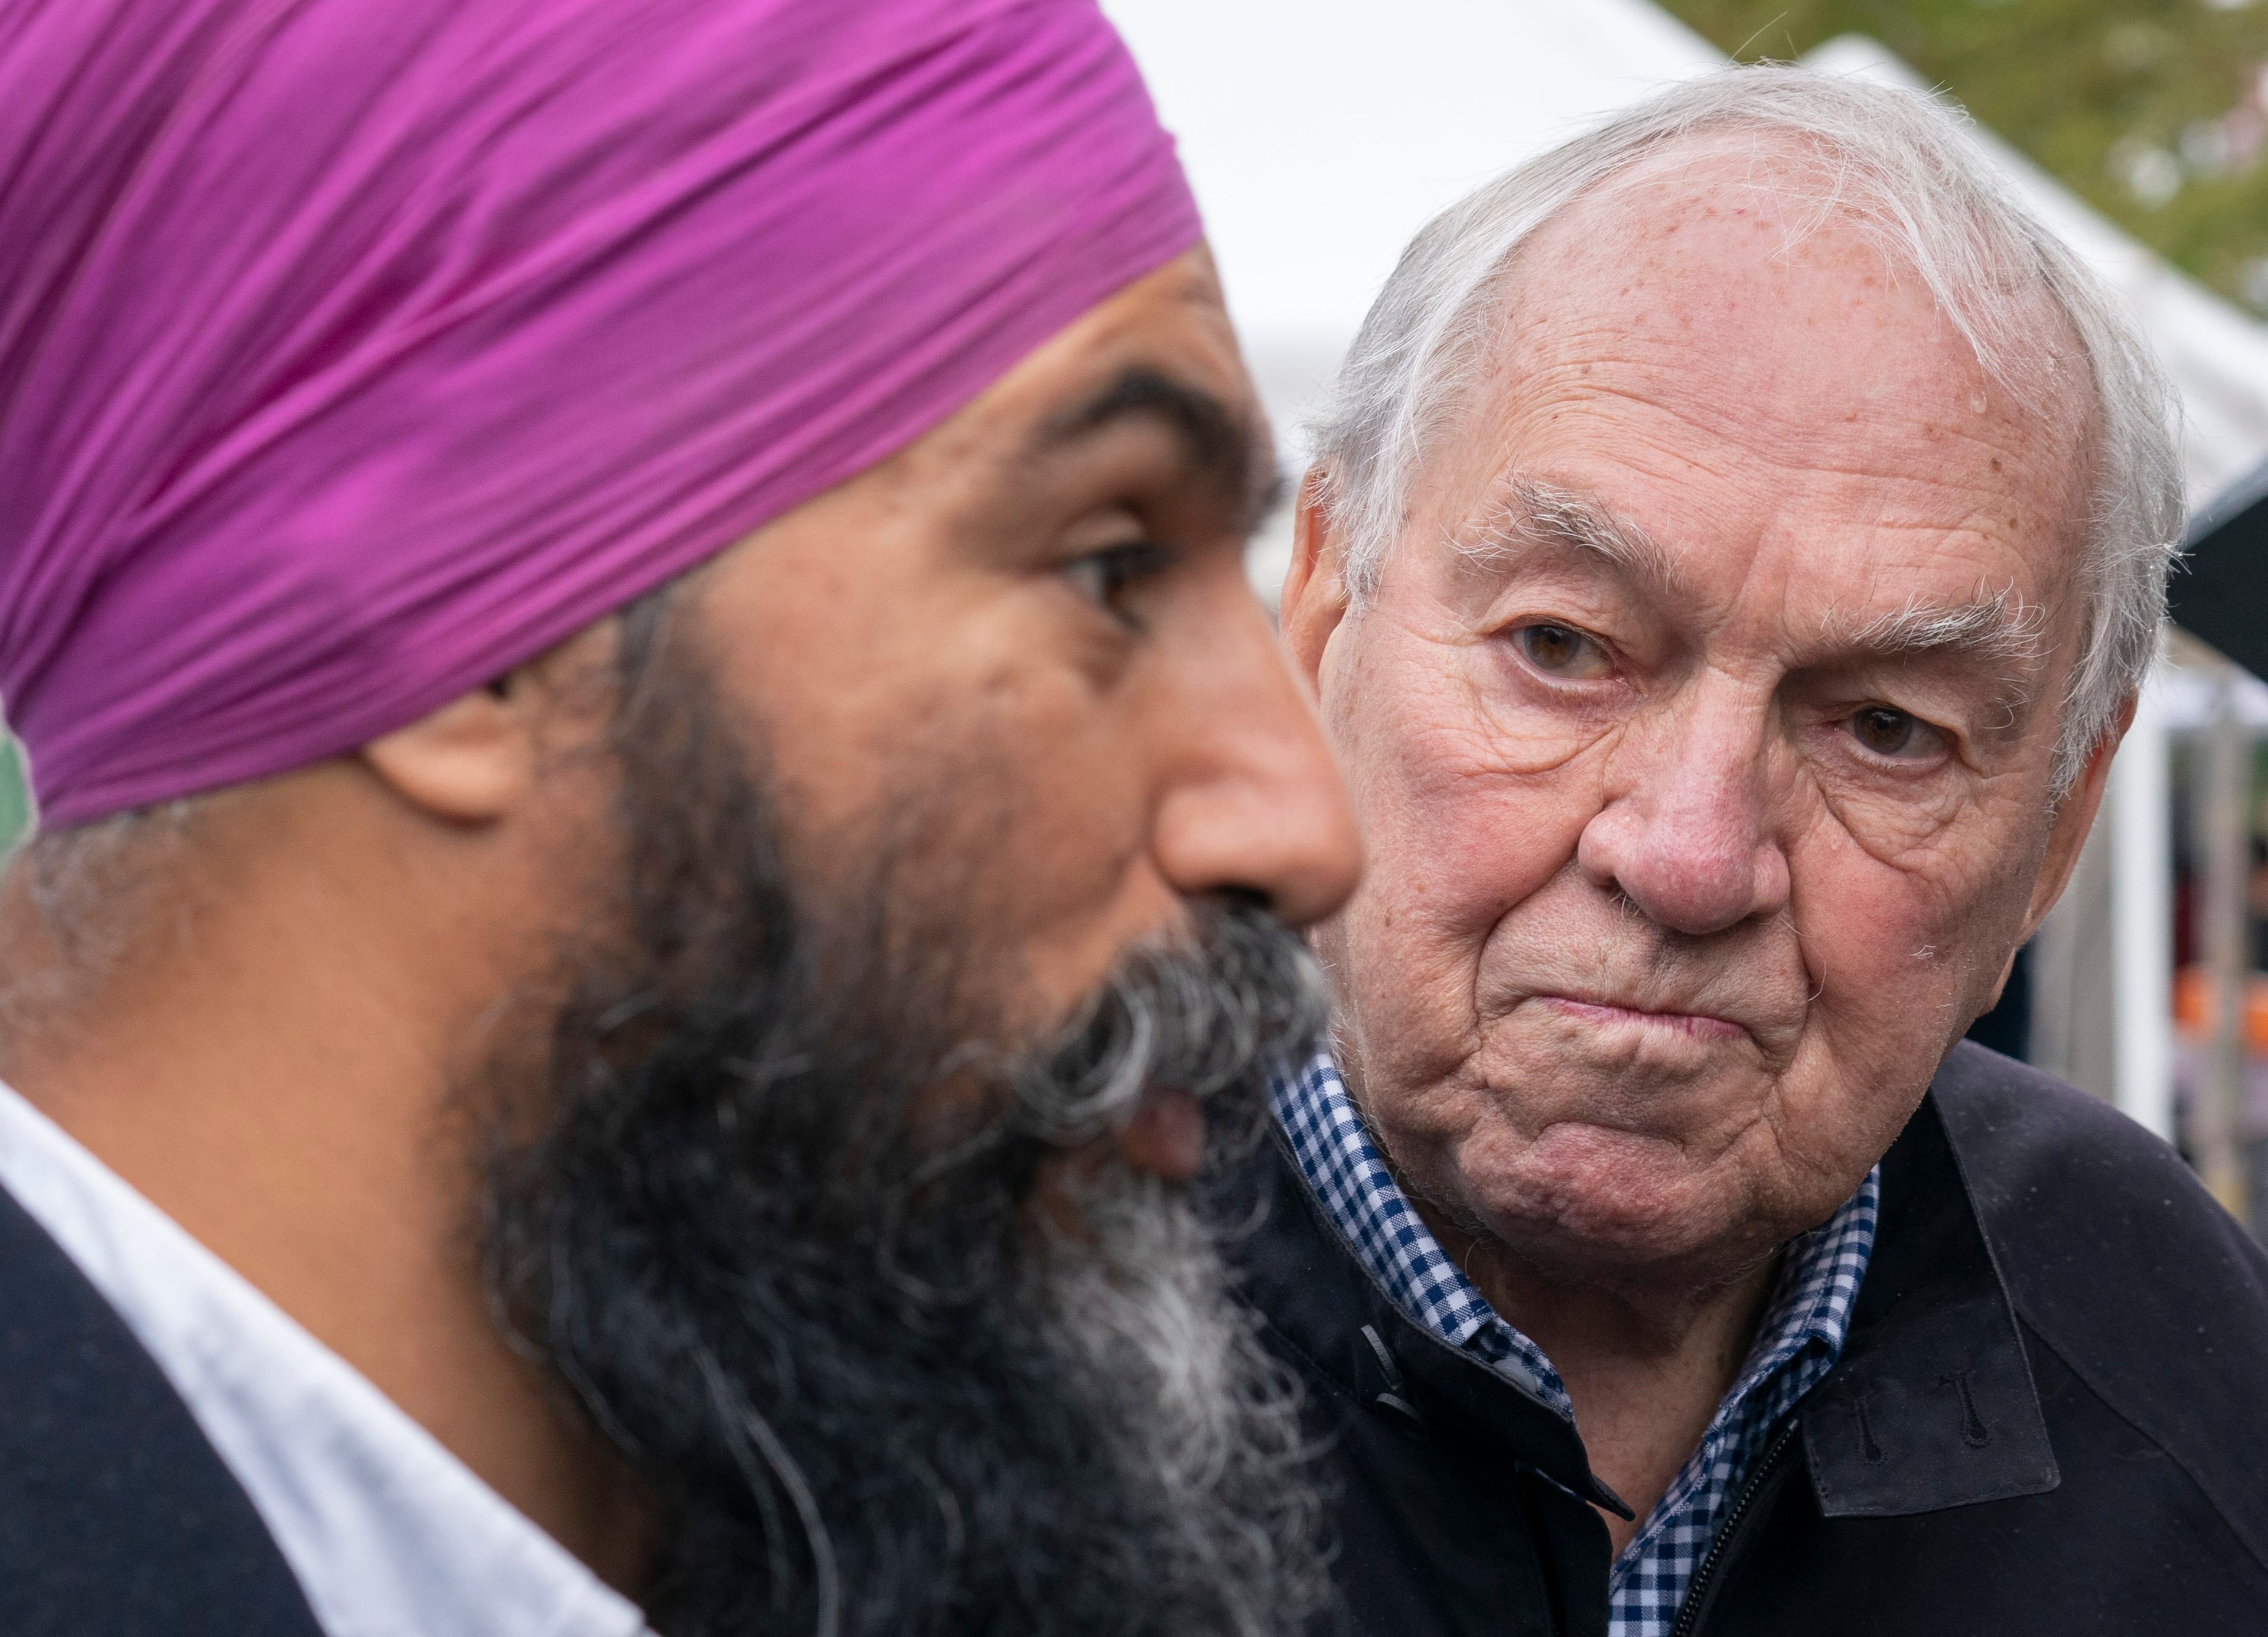 Broadbent listens to NDP leader Jagmeet Singh as they tour a farmers market in Ottawa, on Oct. 6, 2019 (CP/Paul Chiasson)